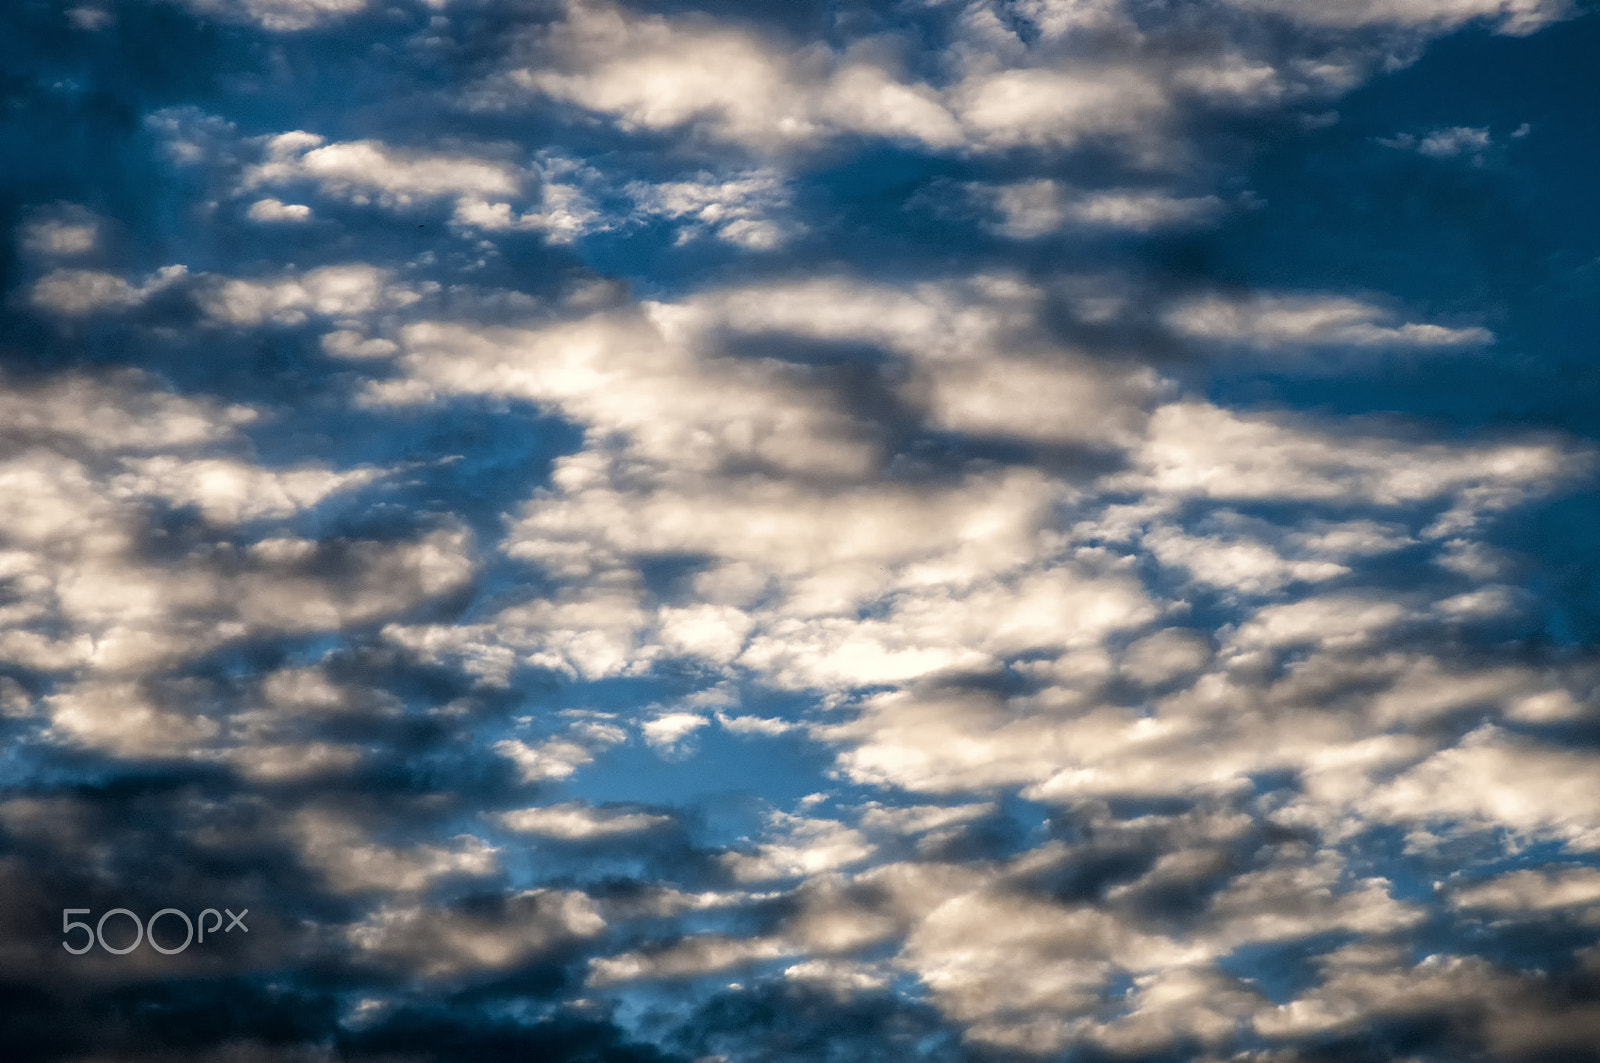 Nikon D300 sample photo. Clouds lit by the last rays of sun at dusk photography